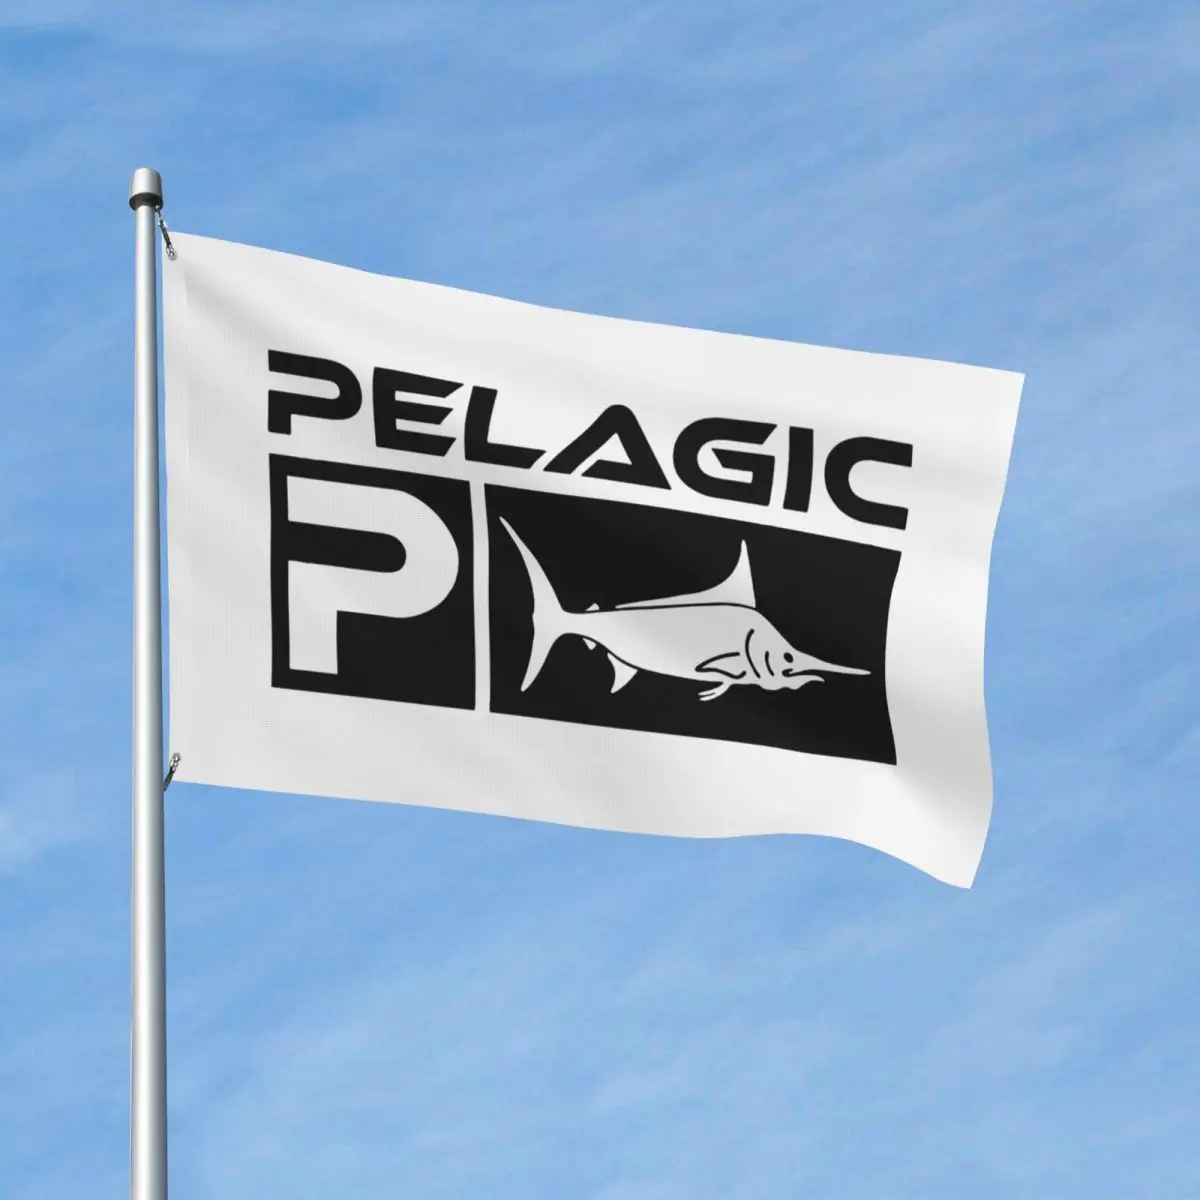 Pelagic Fishing Flag Double Sided Outdoor Banner Marine All Weather Home  Room Dorm Wall Decor 3x5 FT